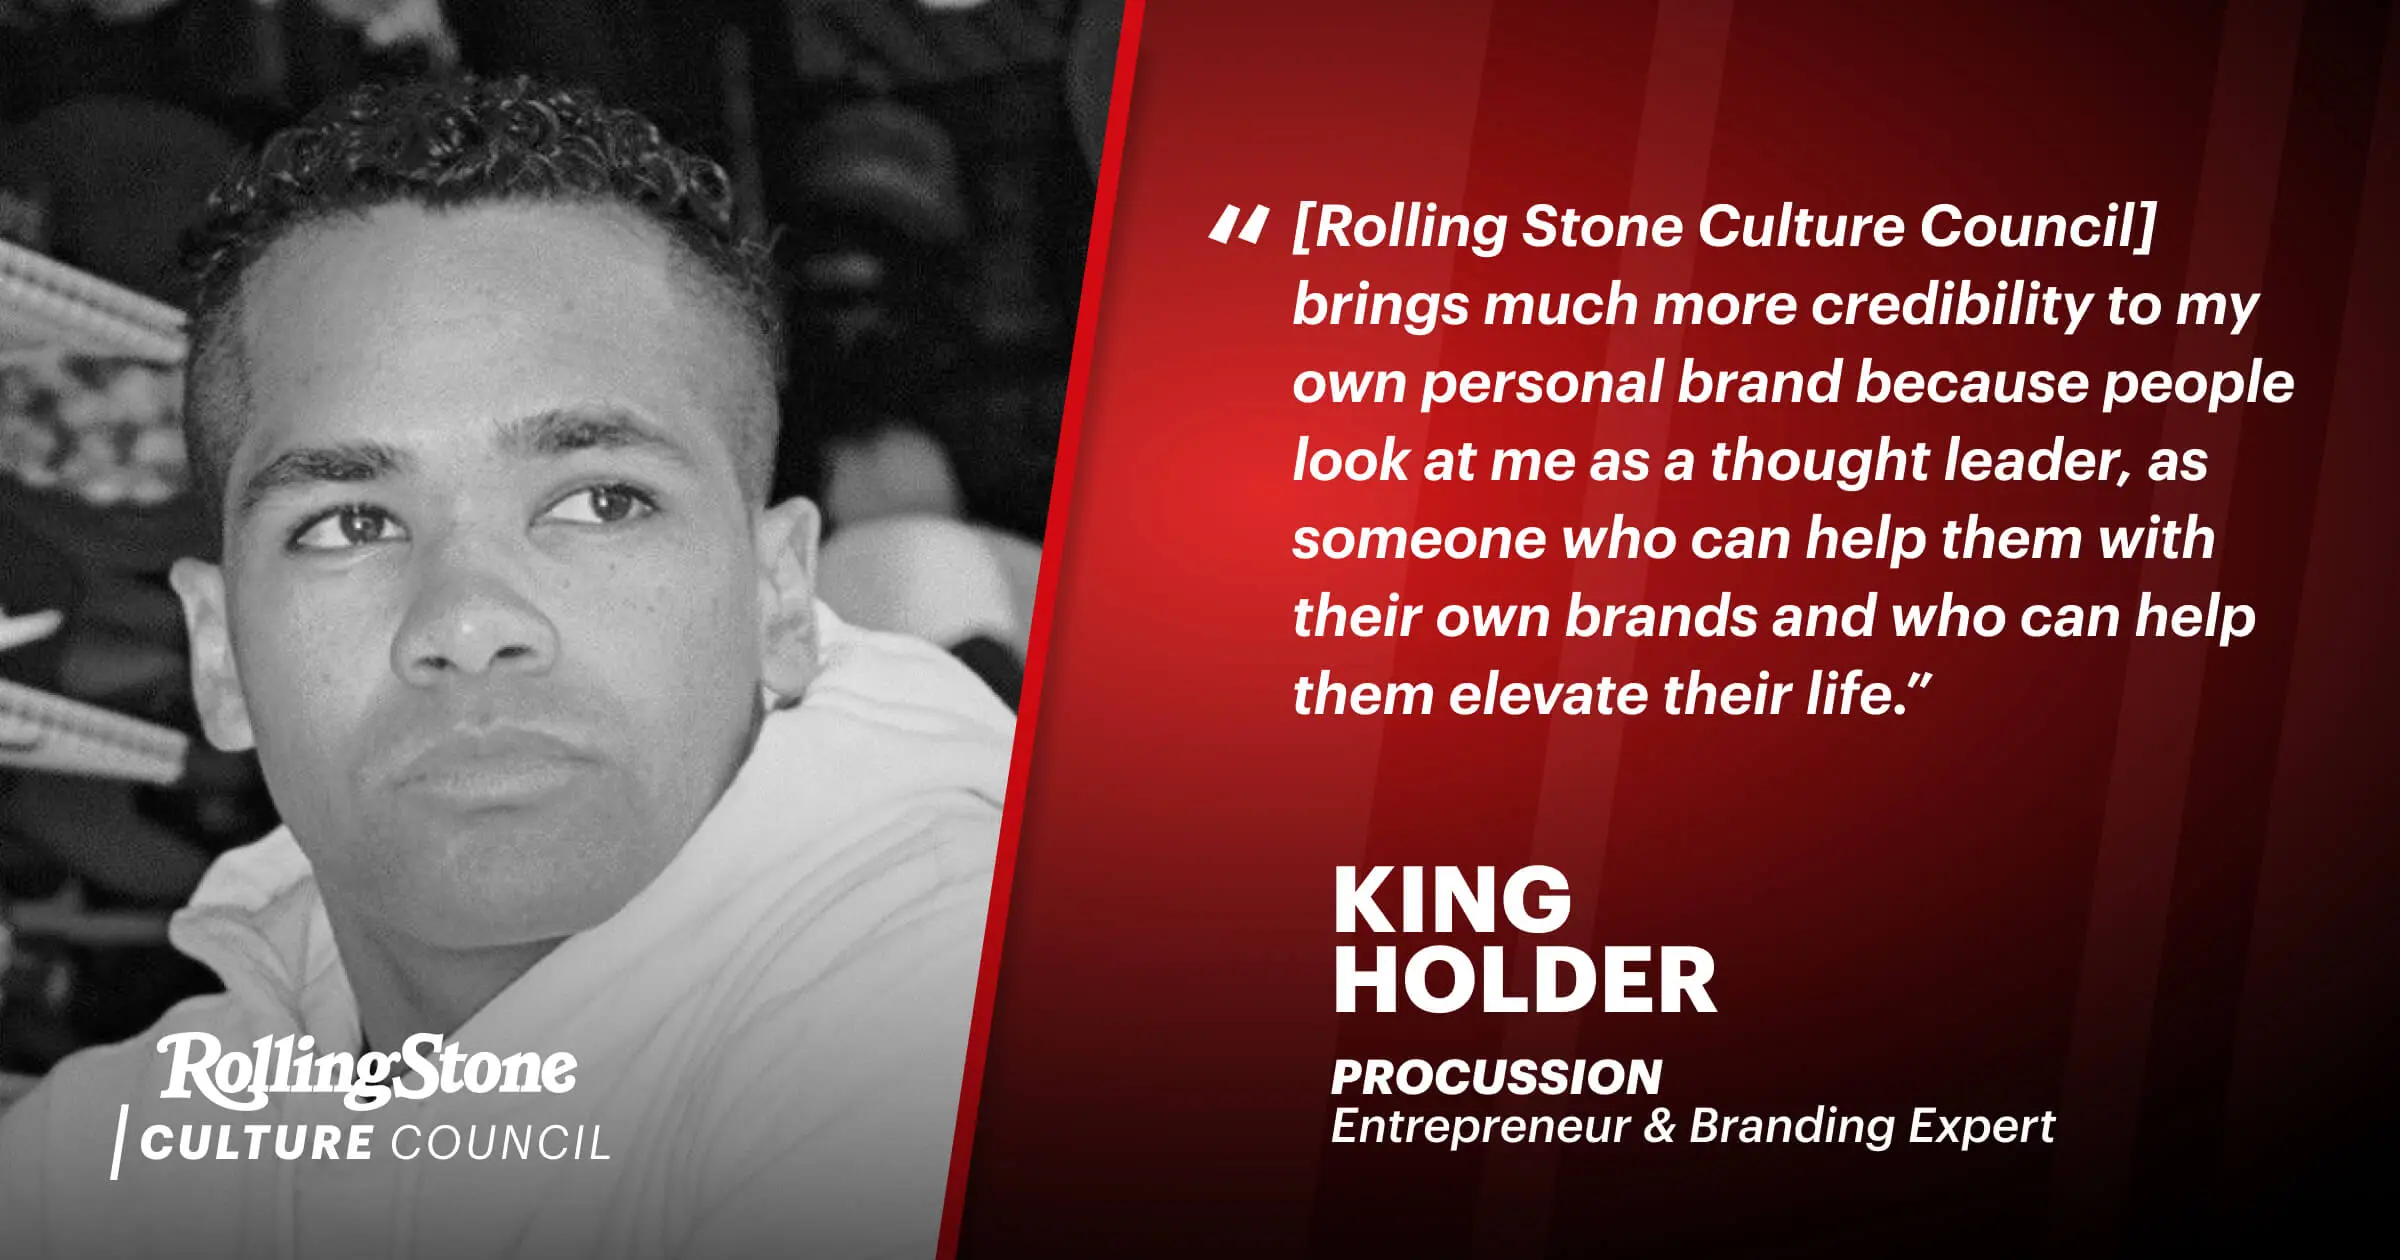 Rolling Stone Culture Gives King Holder the Opportunity to Be of Service to Other Entrepreneurs